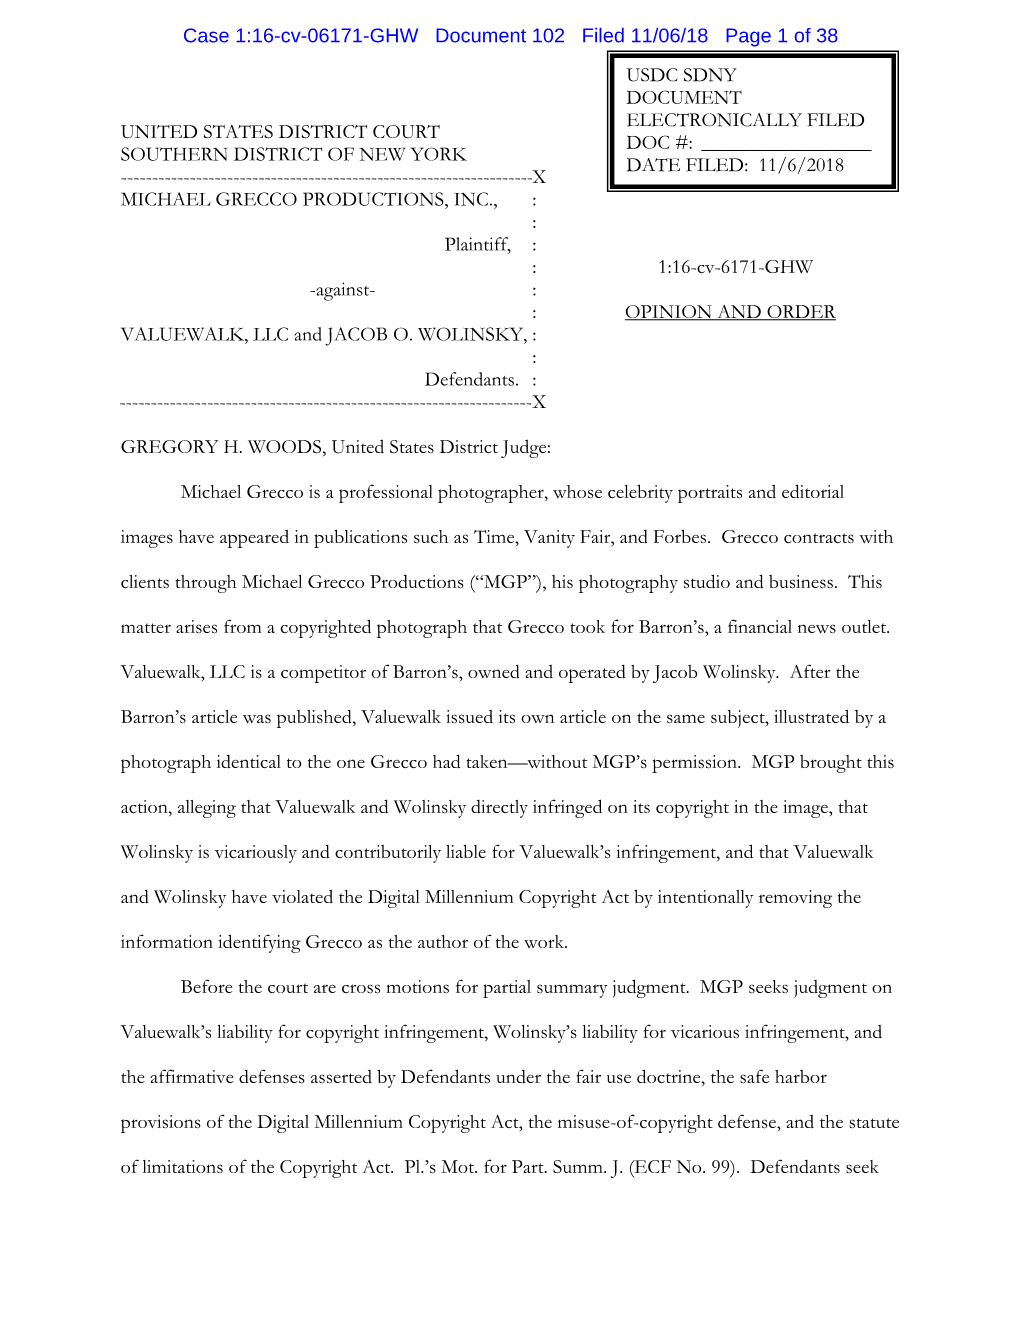 Case 1:16-Cv-06171-GHW Document 102 Filed 11/06/18 Page 1 of 38